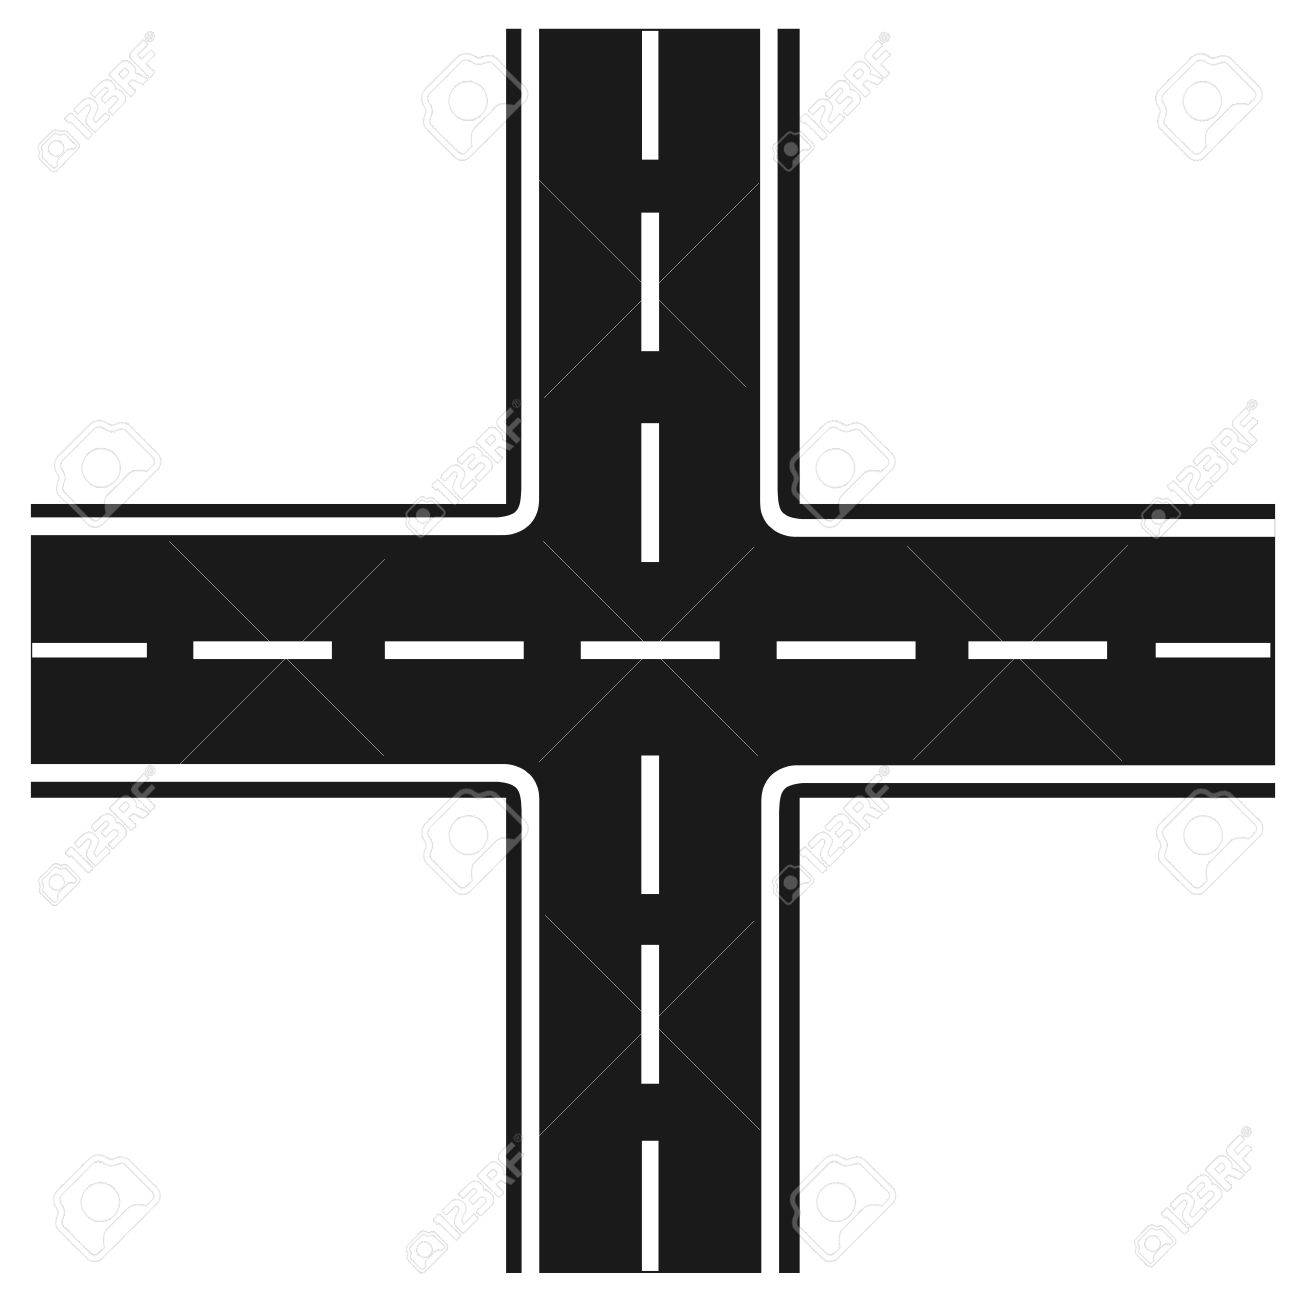 Road clipart intersection.